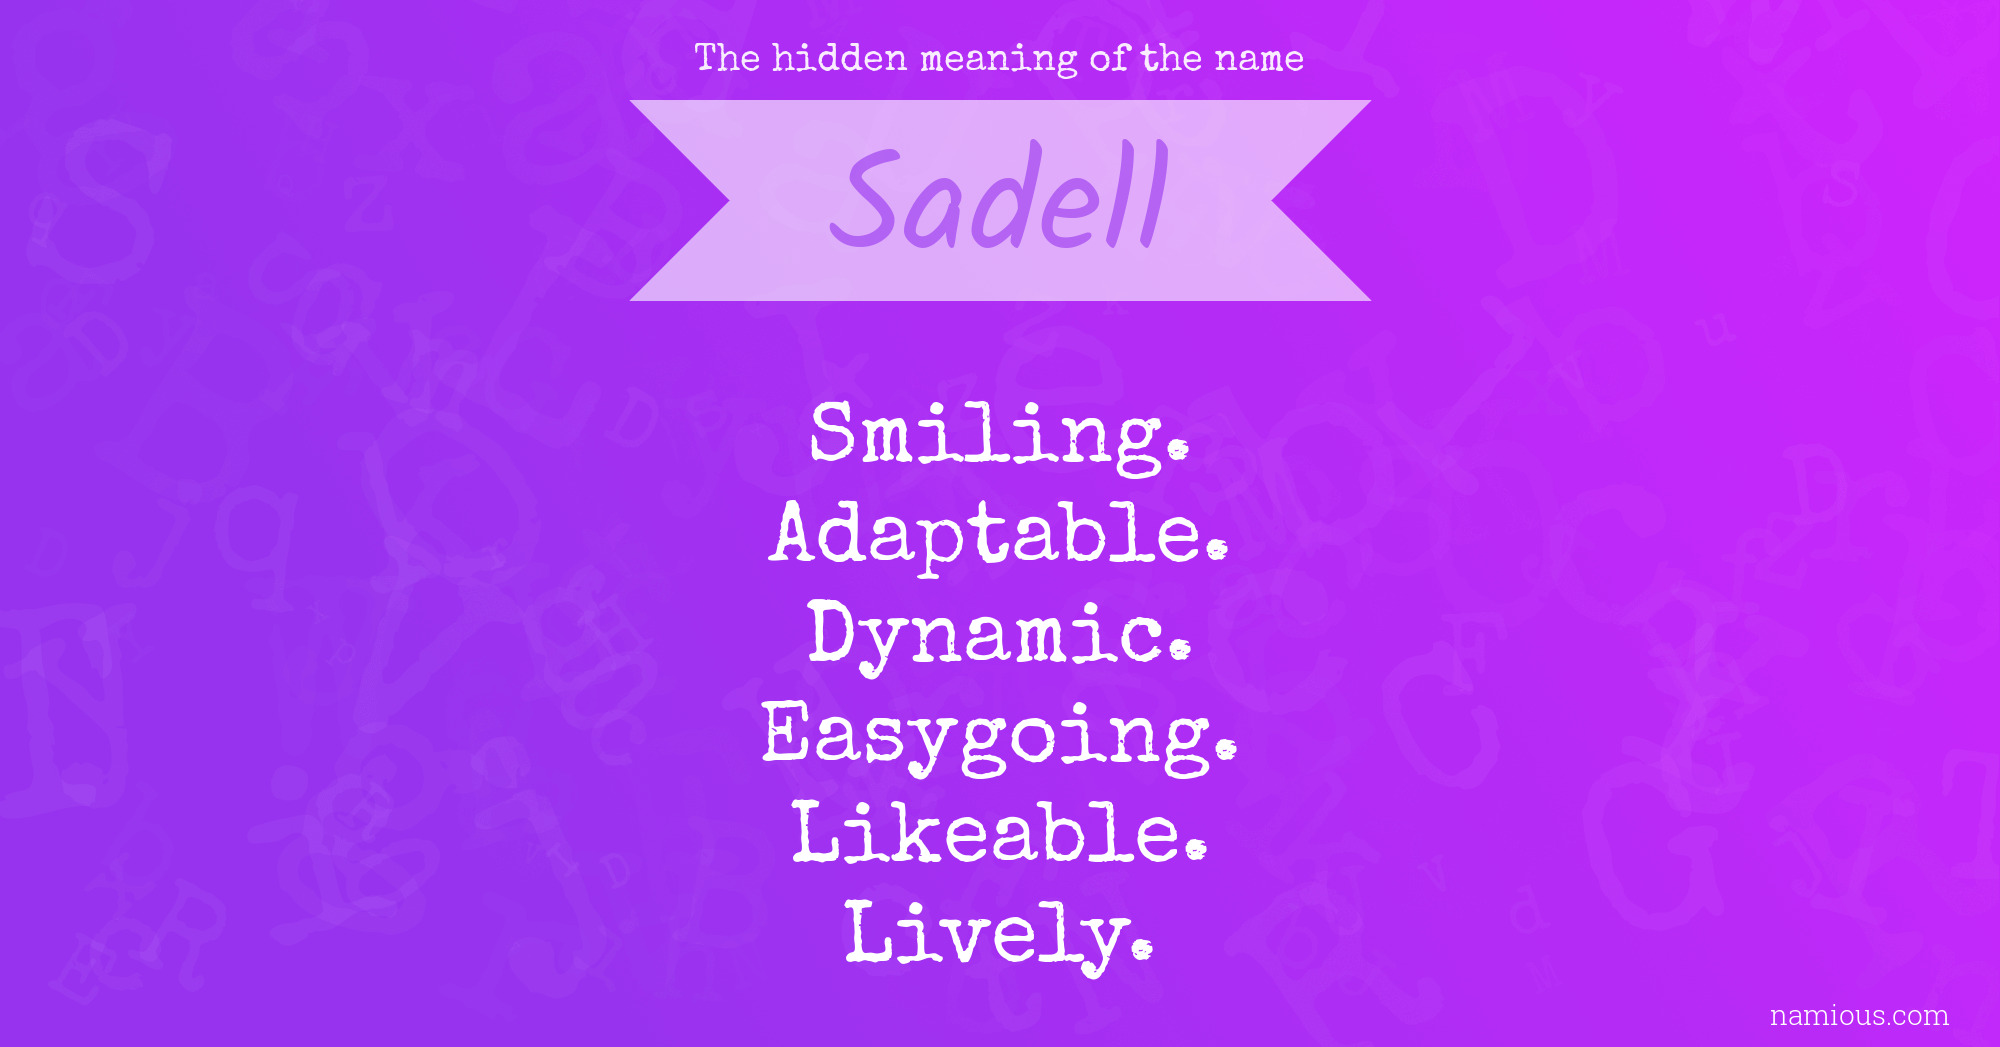 The hidden meaning of the name Sadell